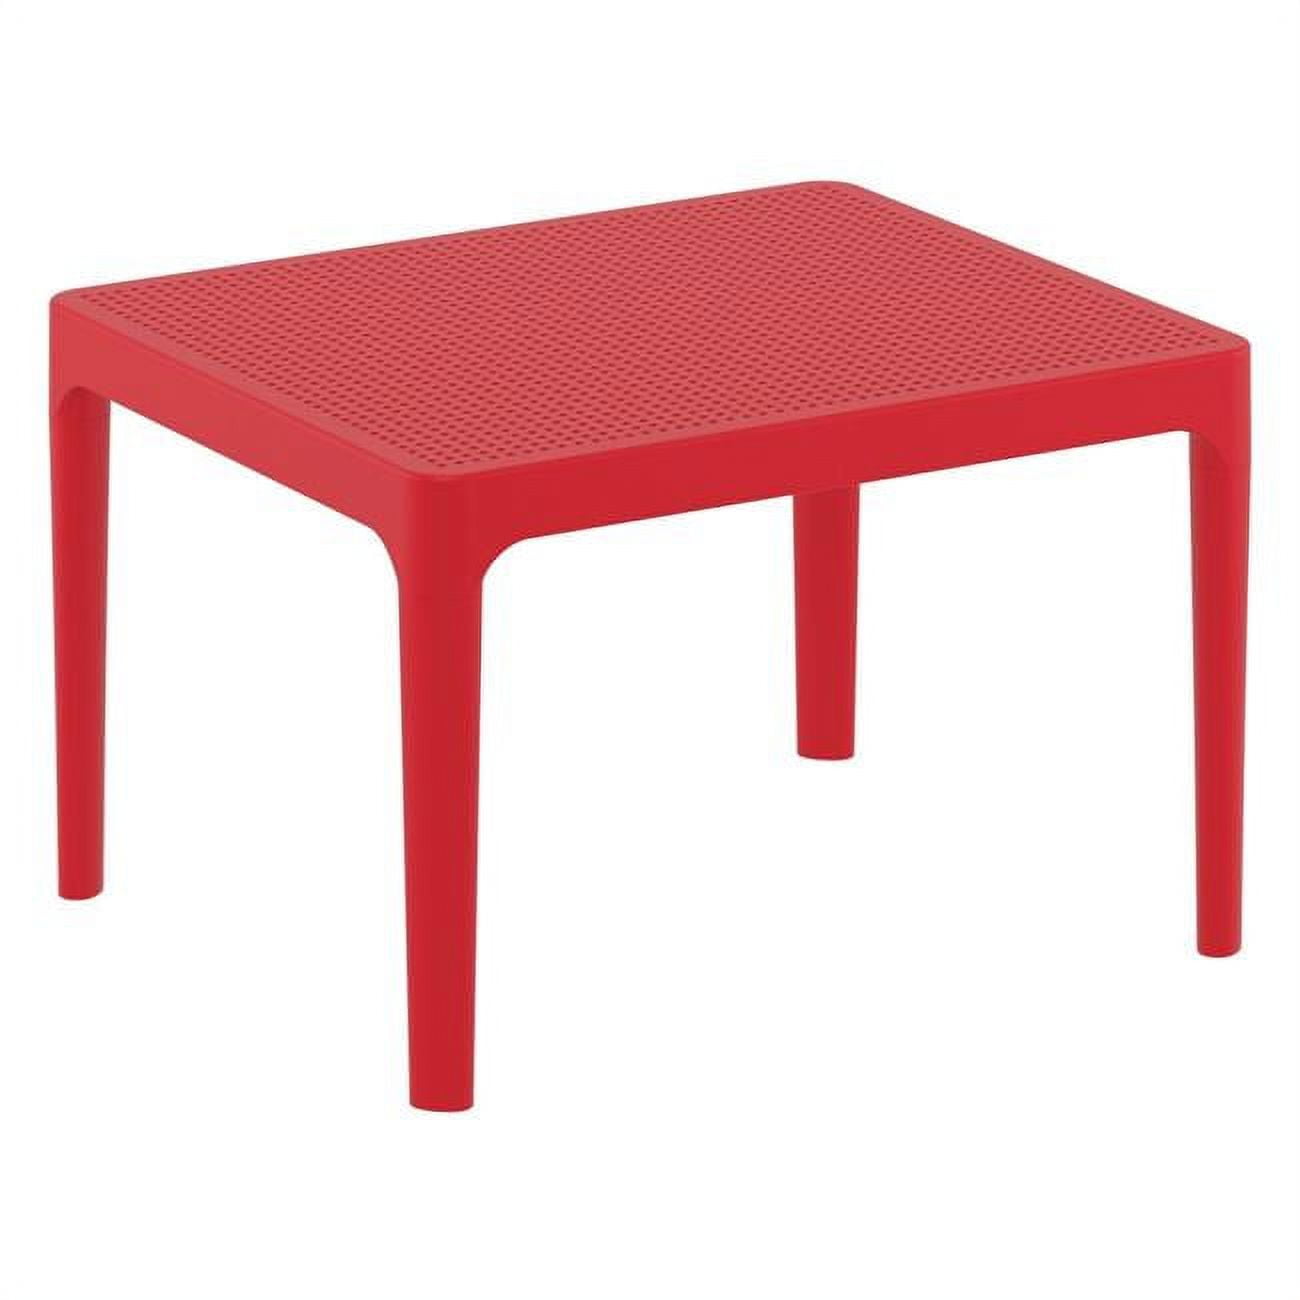 Isp109-red 24 In. Sky Side Table, Red